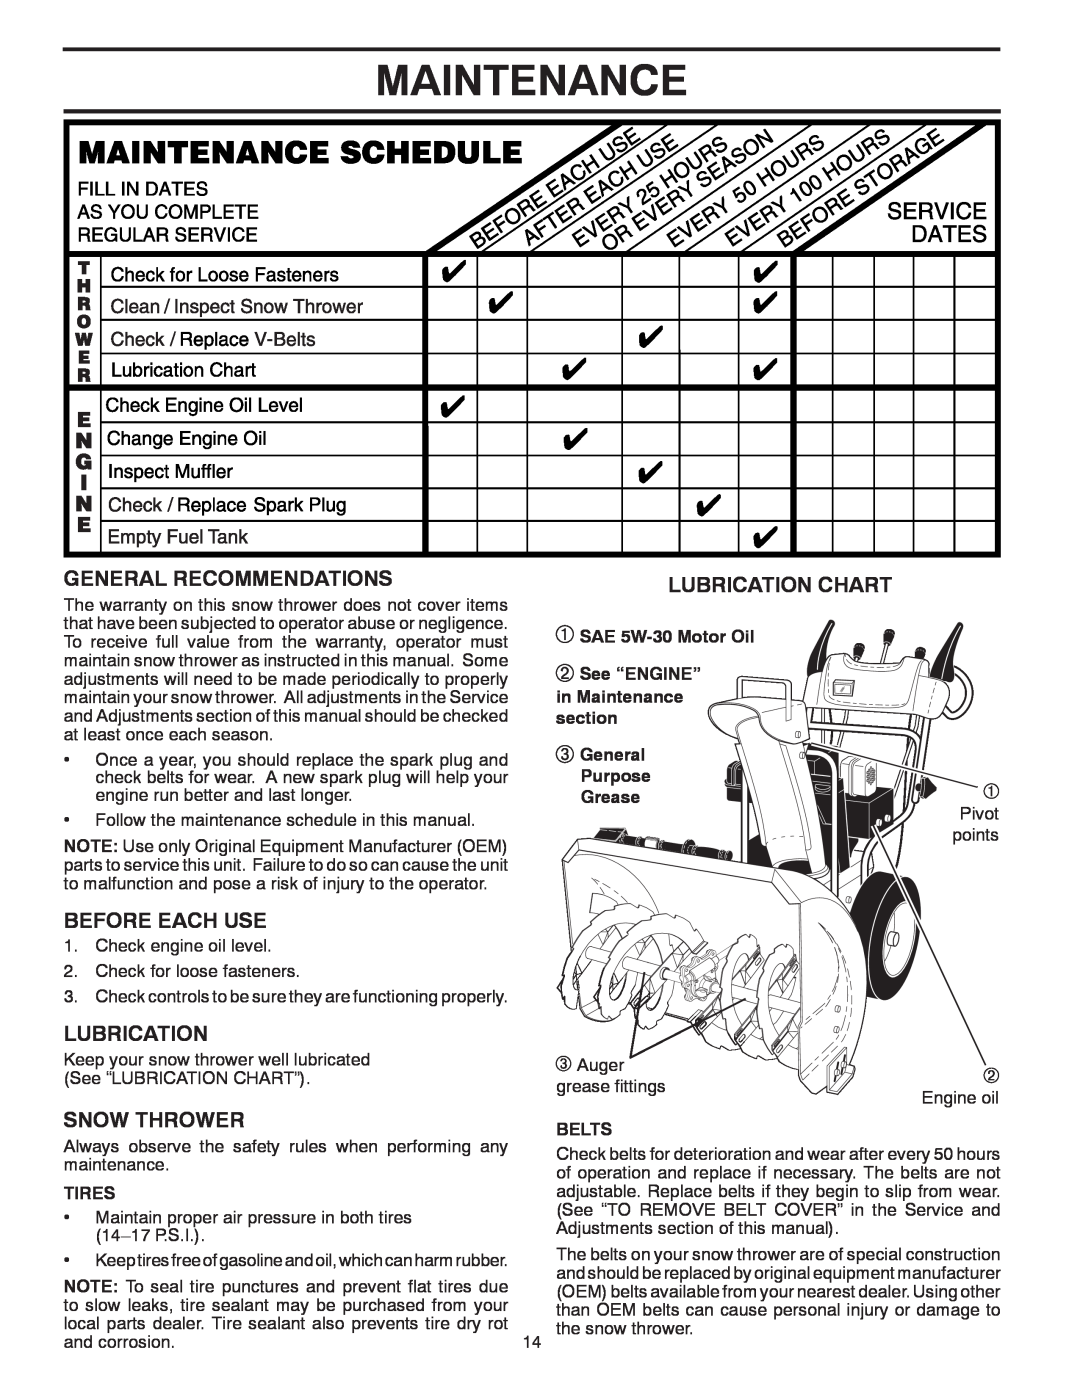 Poulan 428695 Maintenance, General Recommendations, Lubrication Chart, Before Each Use, Snow Thrower, Belts, Tires 